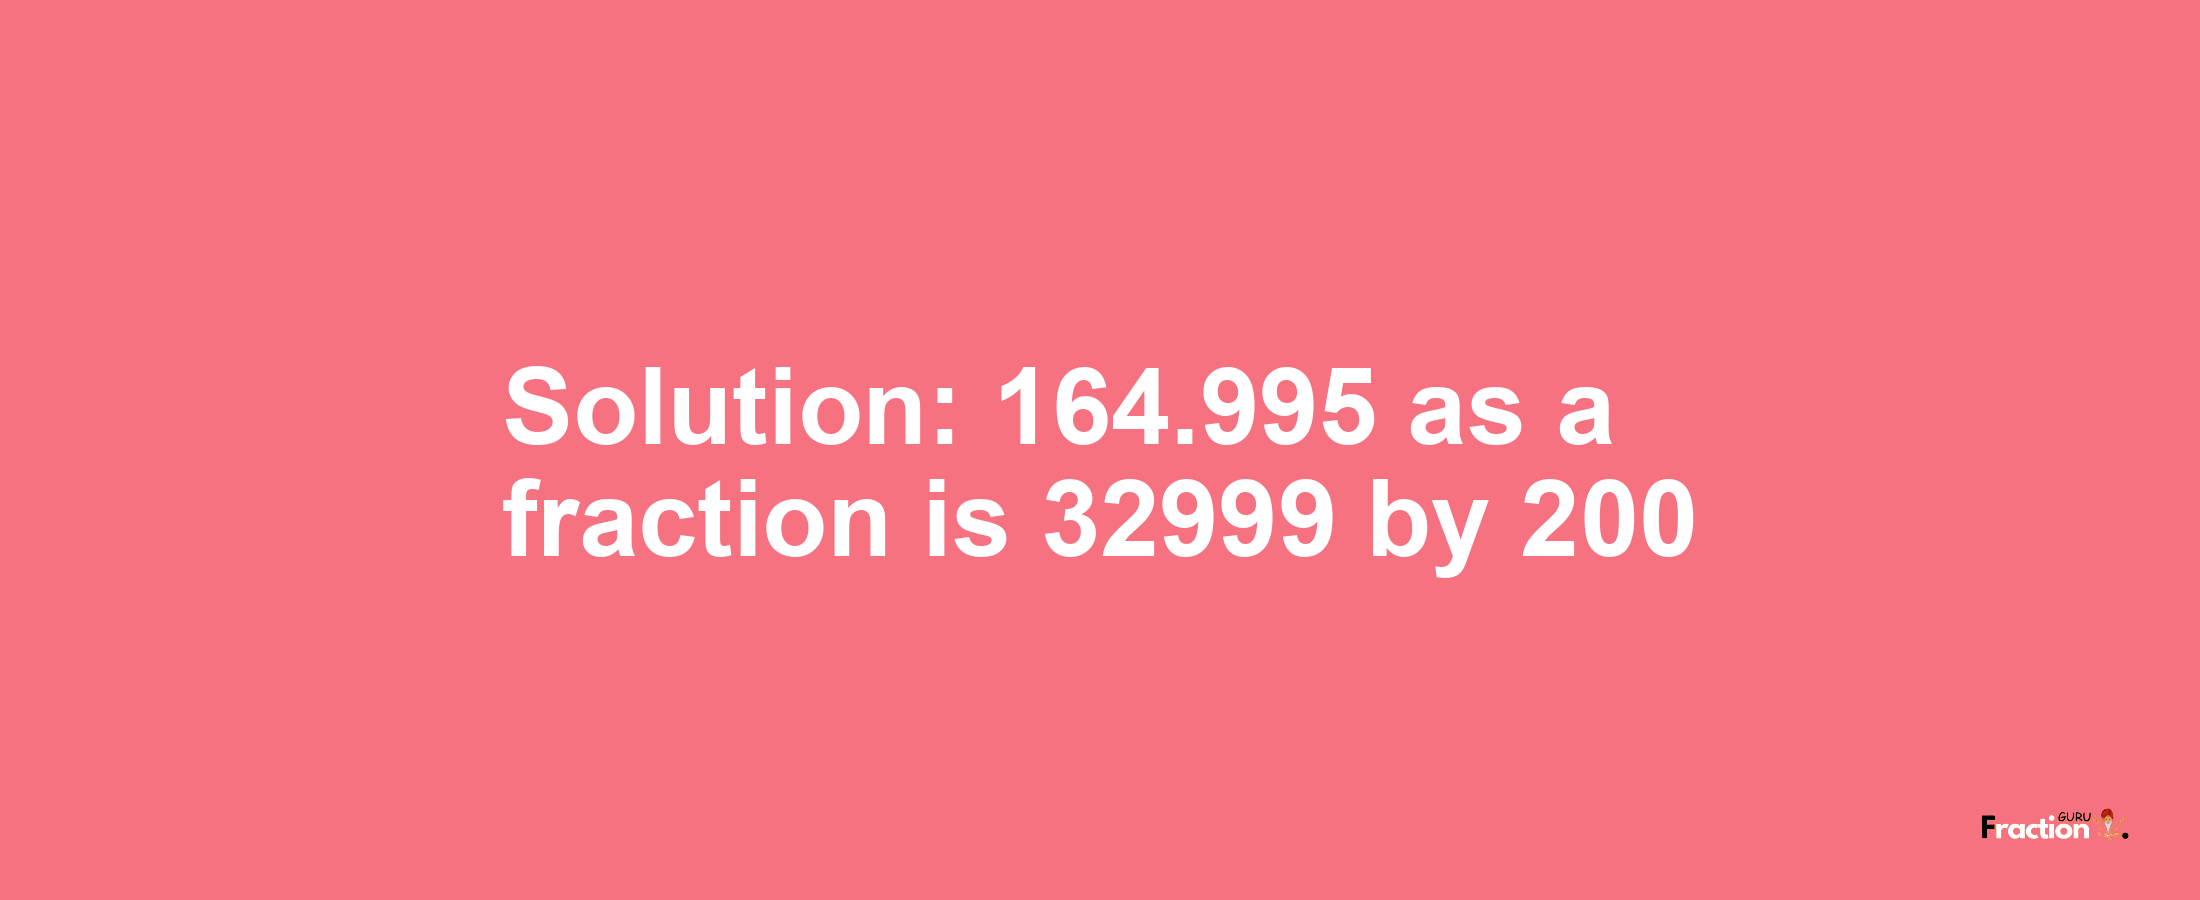 Solution:164.995 as a fraction is 32999/200